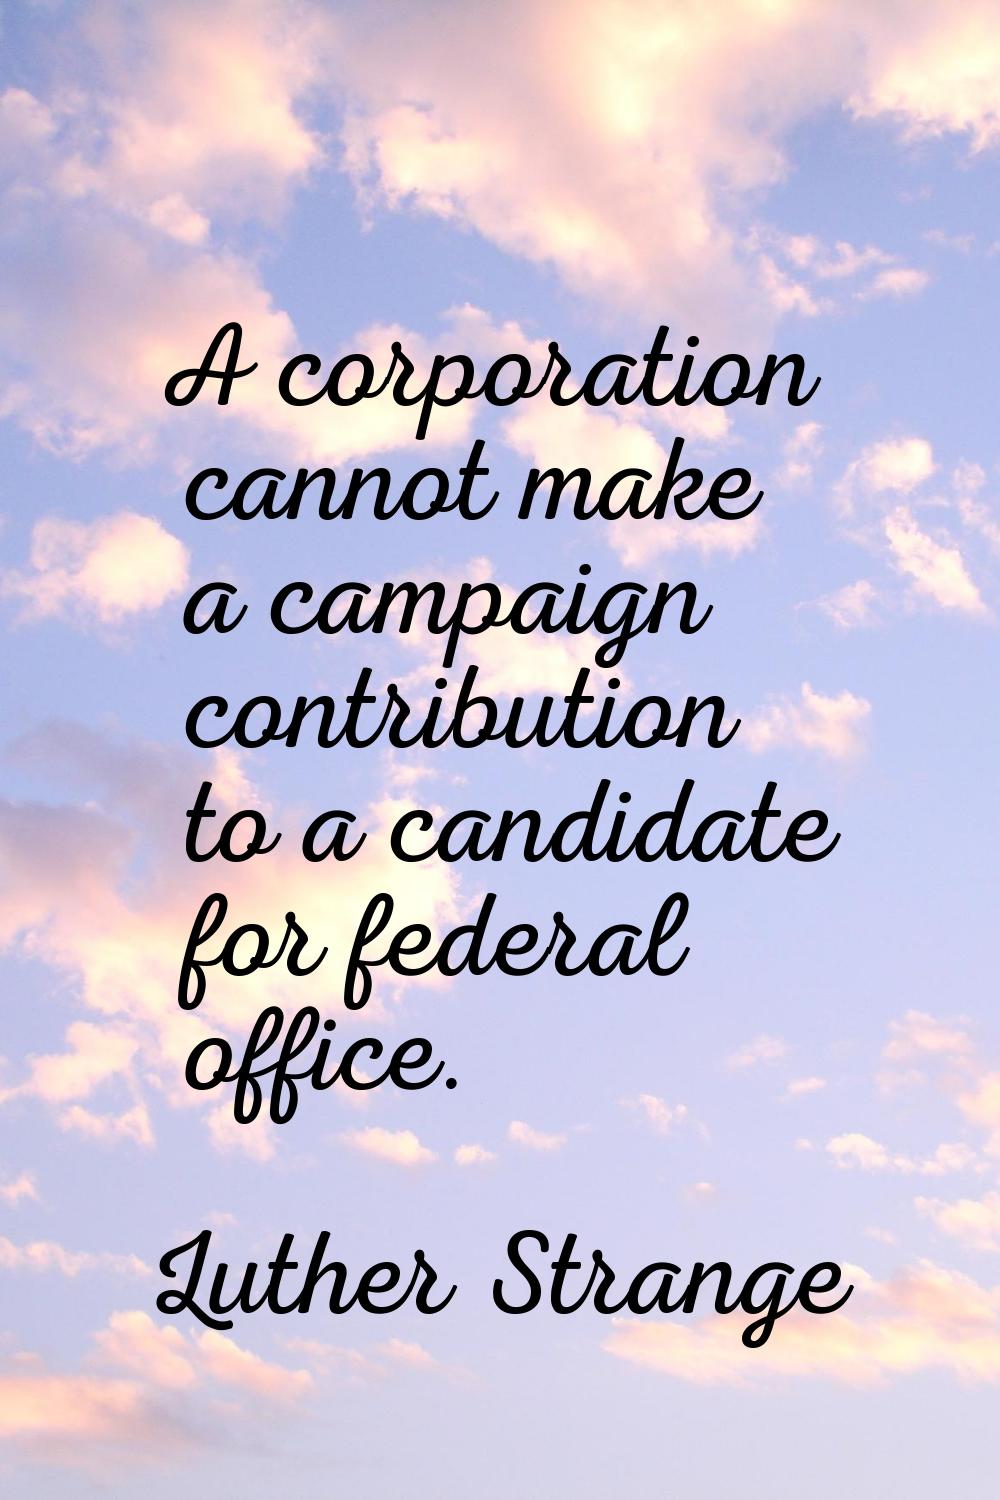 A corporation cannot make a campaign contribution to a candidate for federal office.